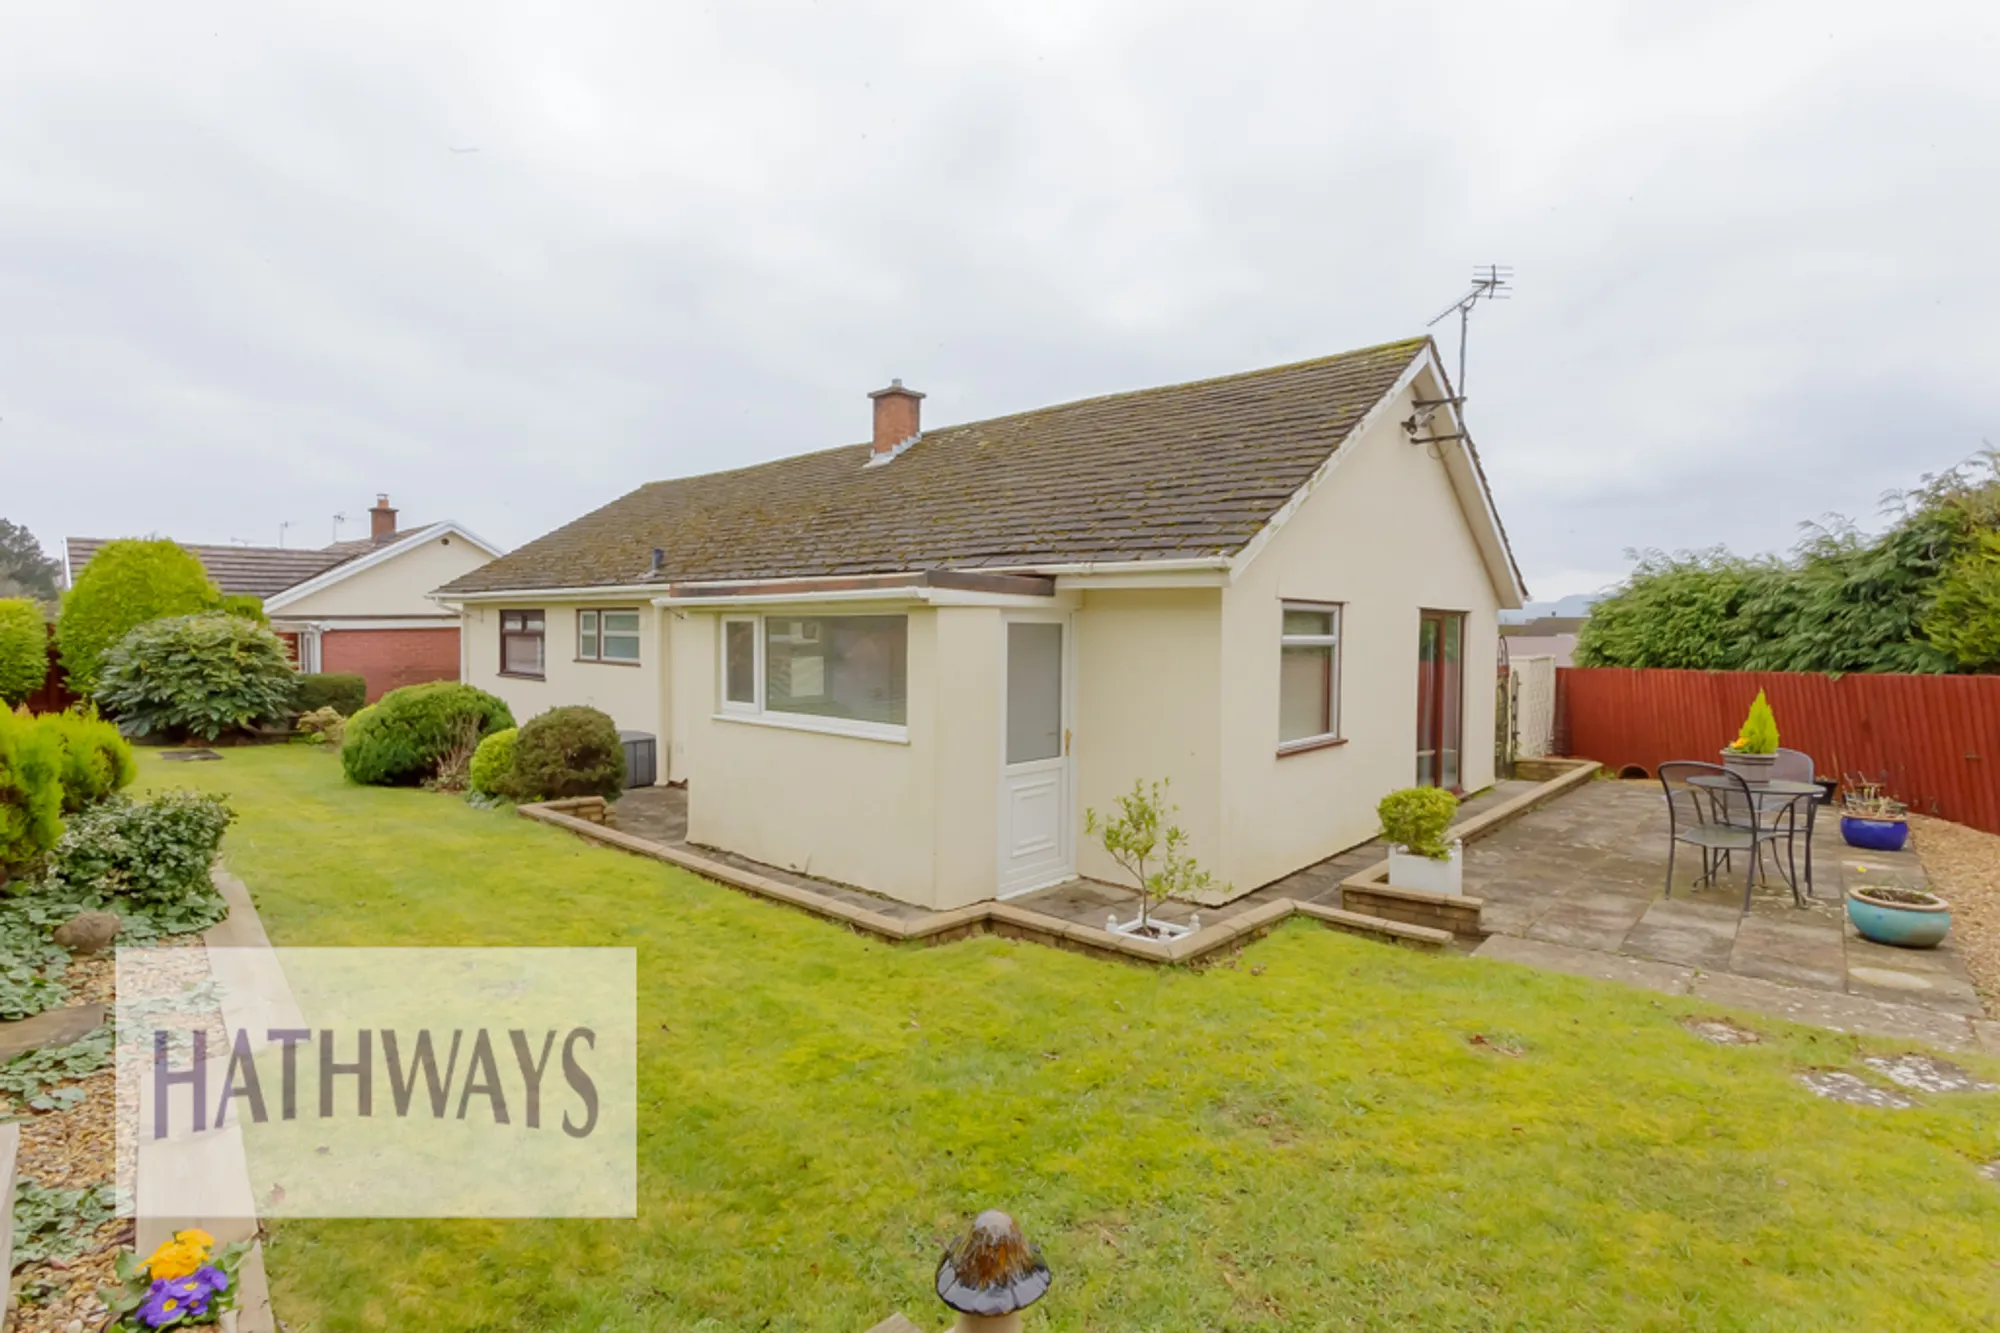 3 bed detached house for sale in Ashford Close North, Cwmbran - Property Image 1